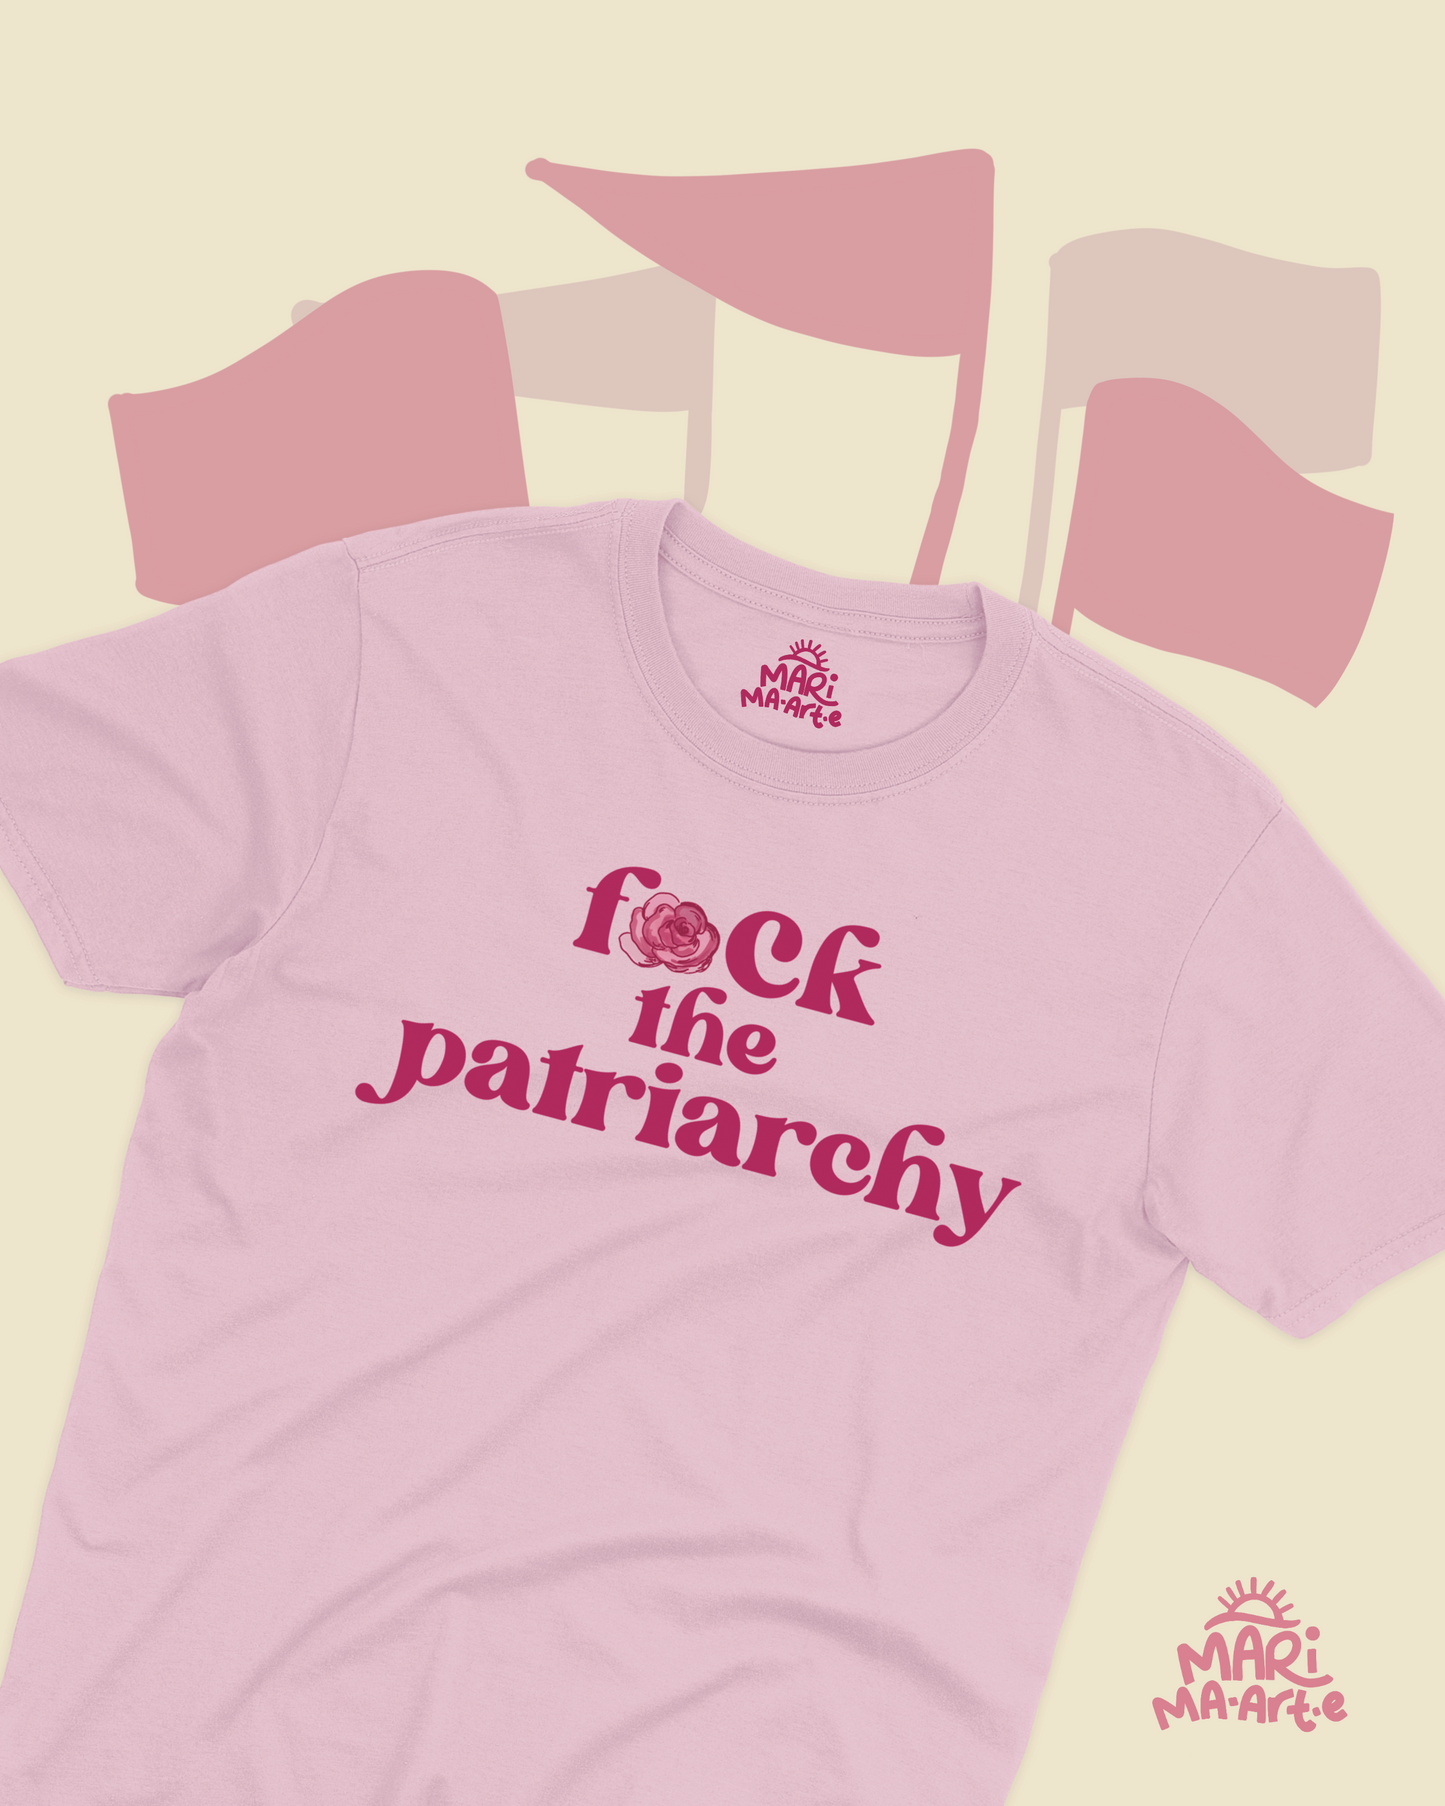 F THE PATRIARCHY (ROSE)